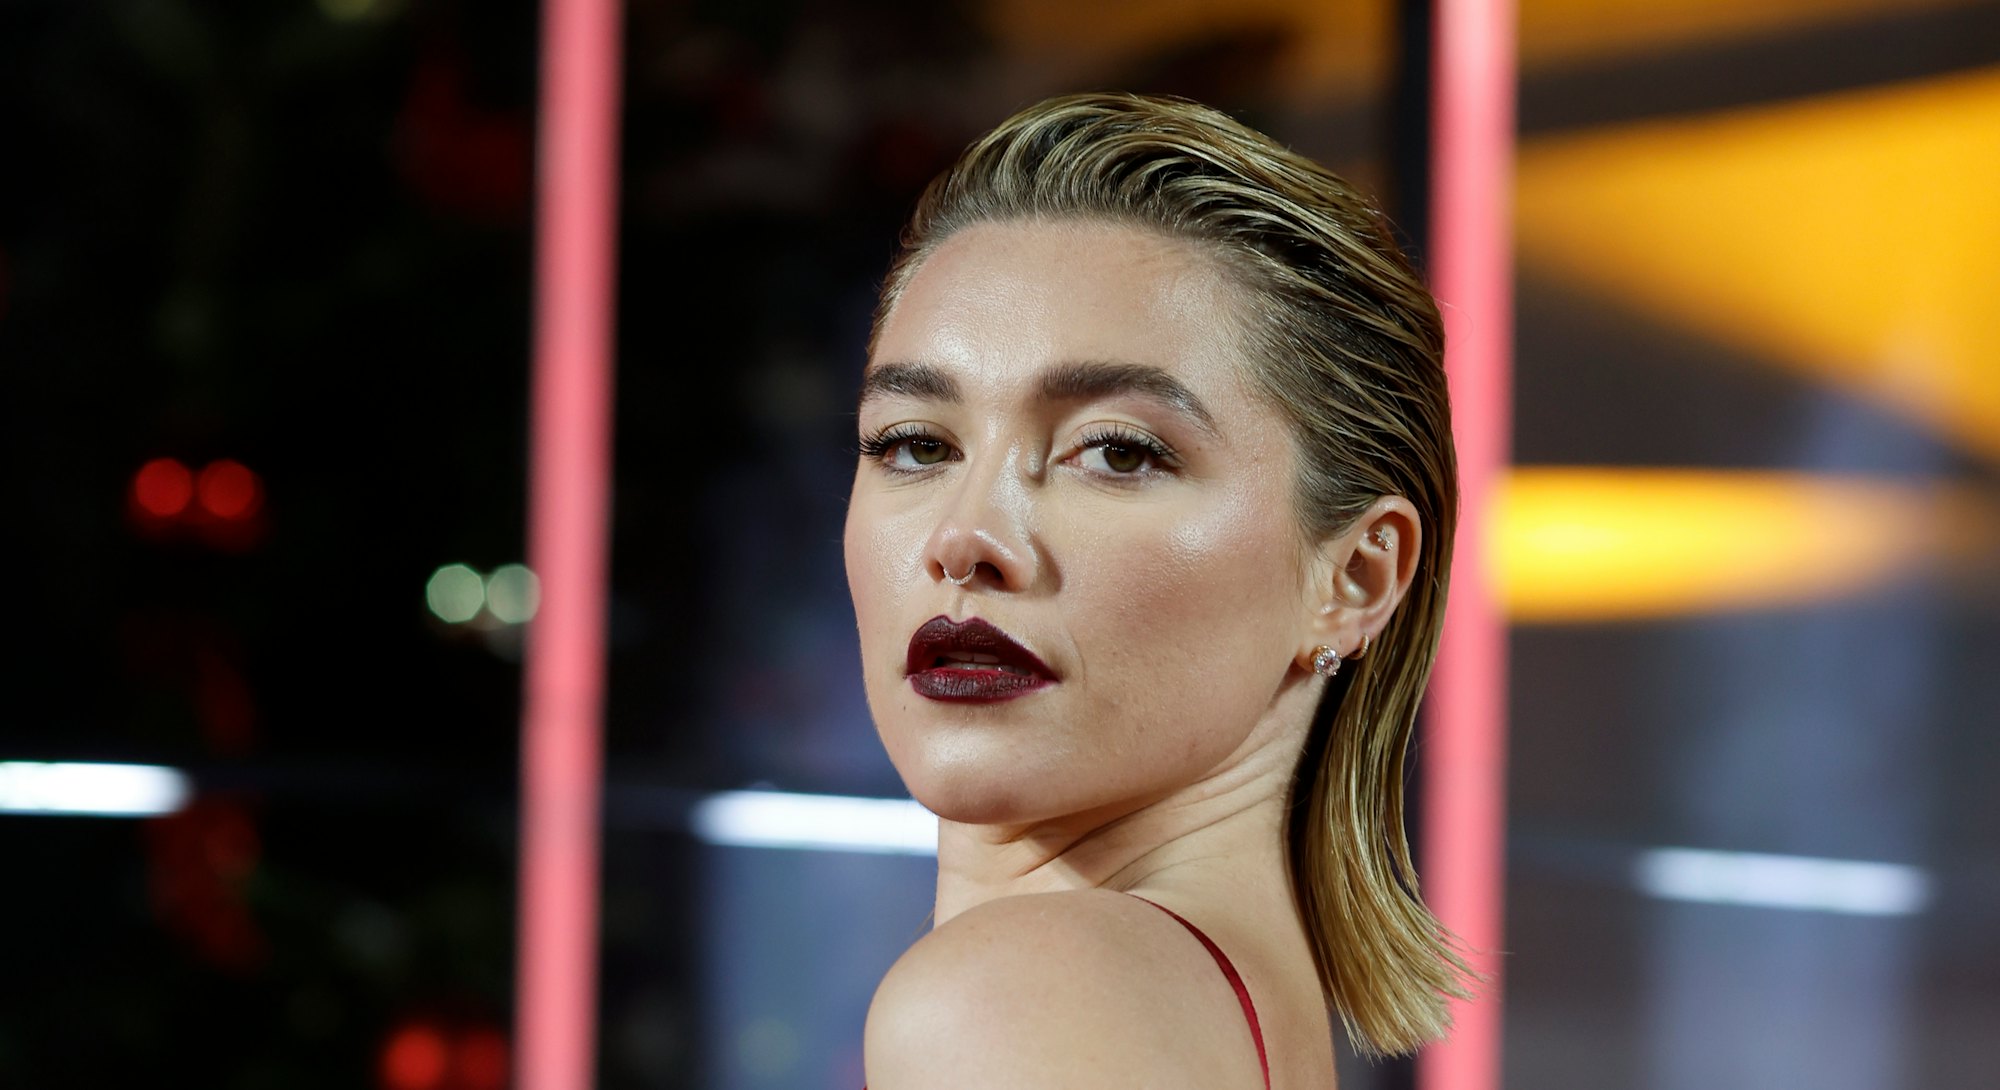 In October 2021, Florence Pugh chopped her hair into a daring pixie — and throughout 2022, we’ve see...